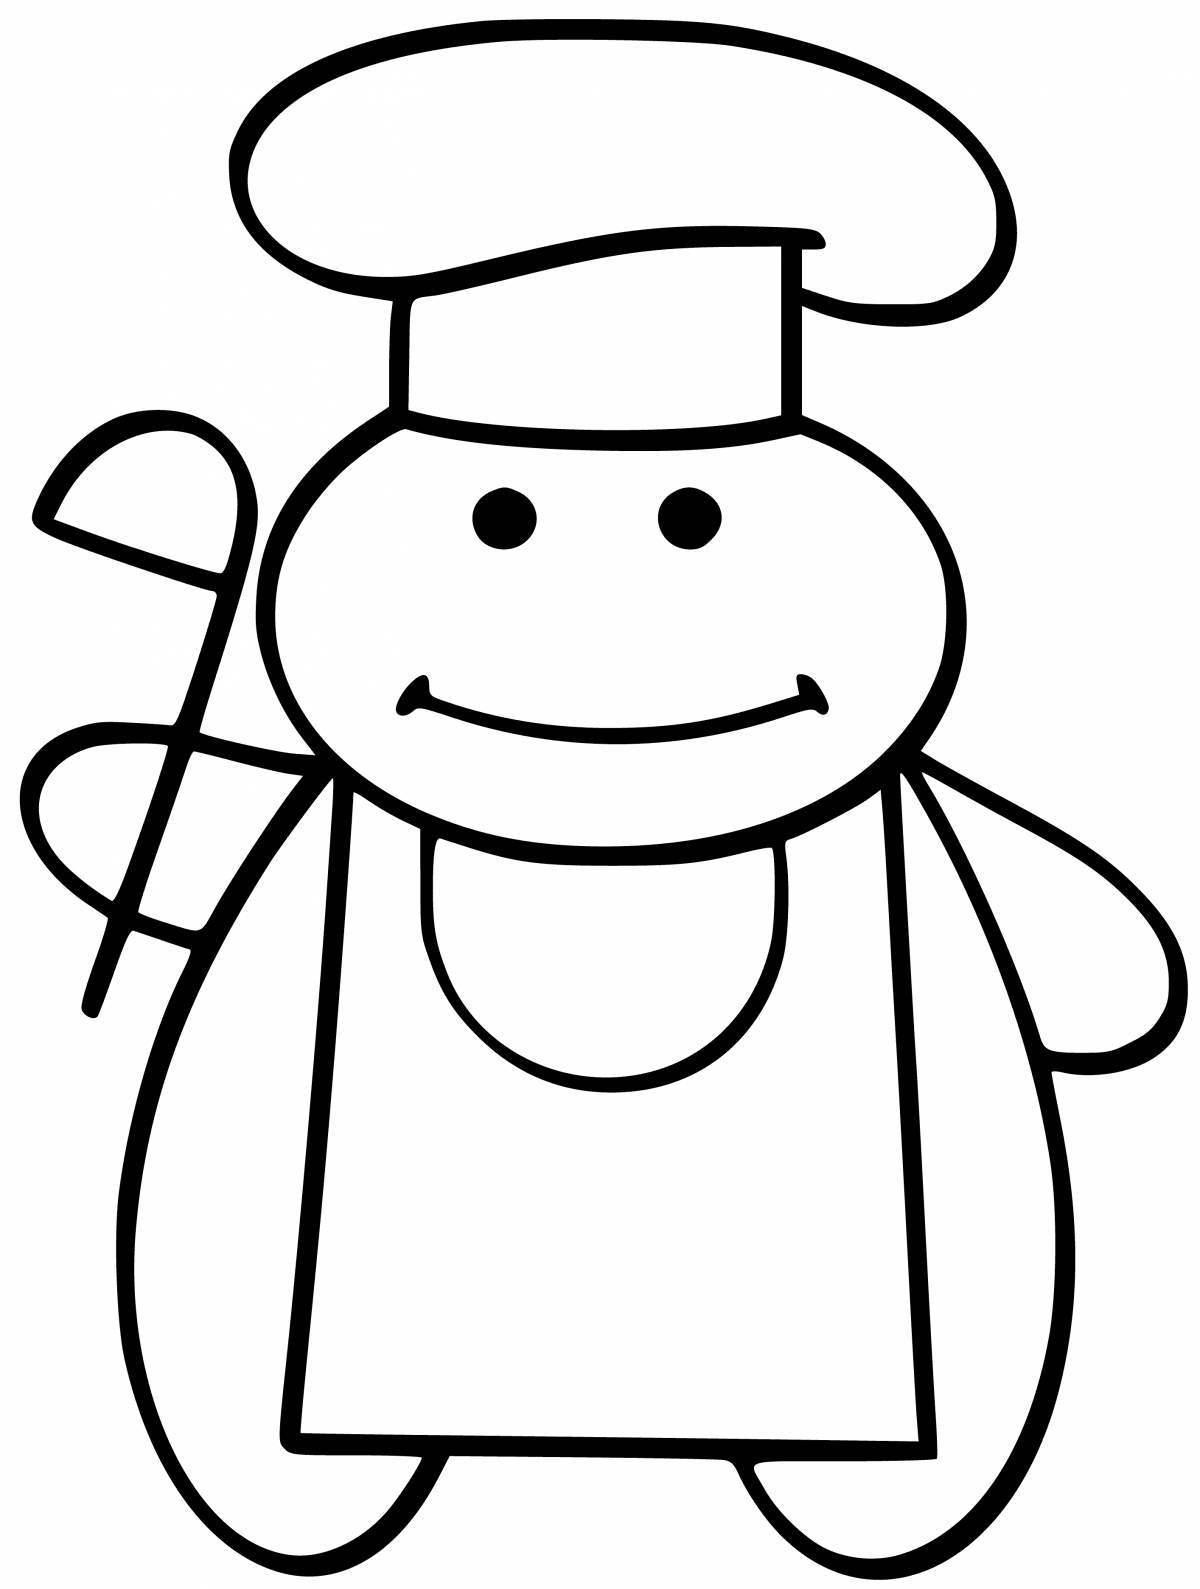 Adorable cook coloring page for kids